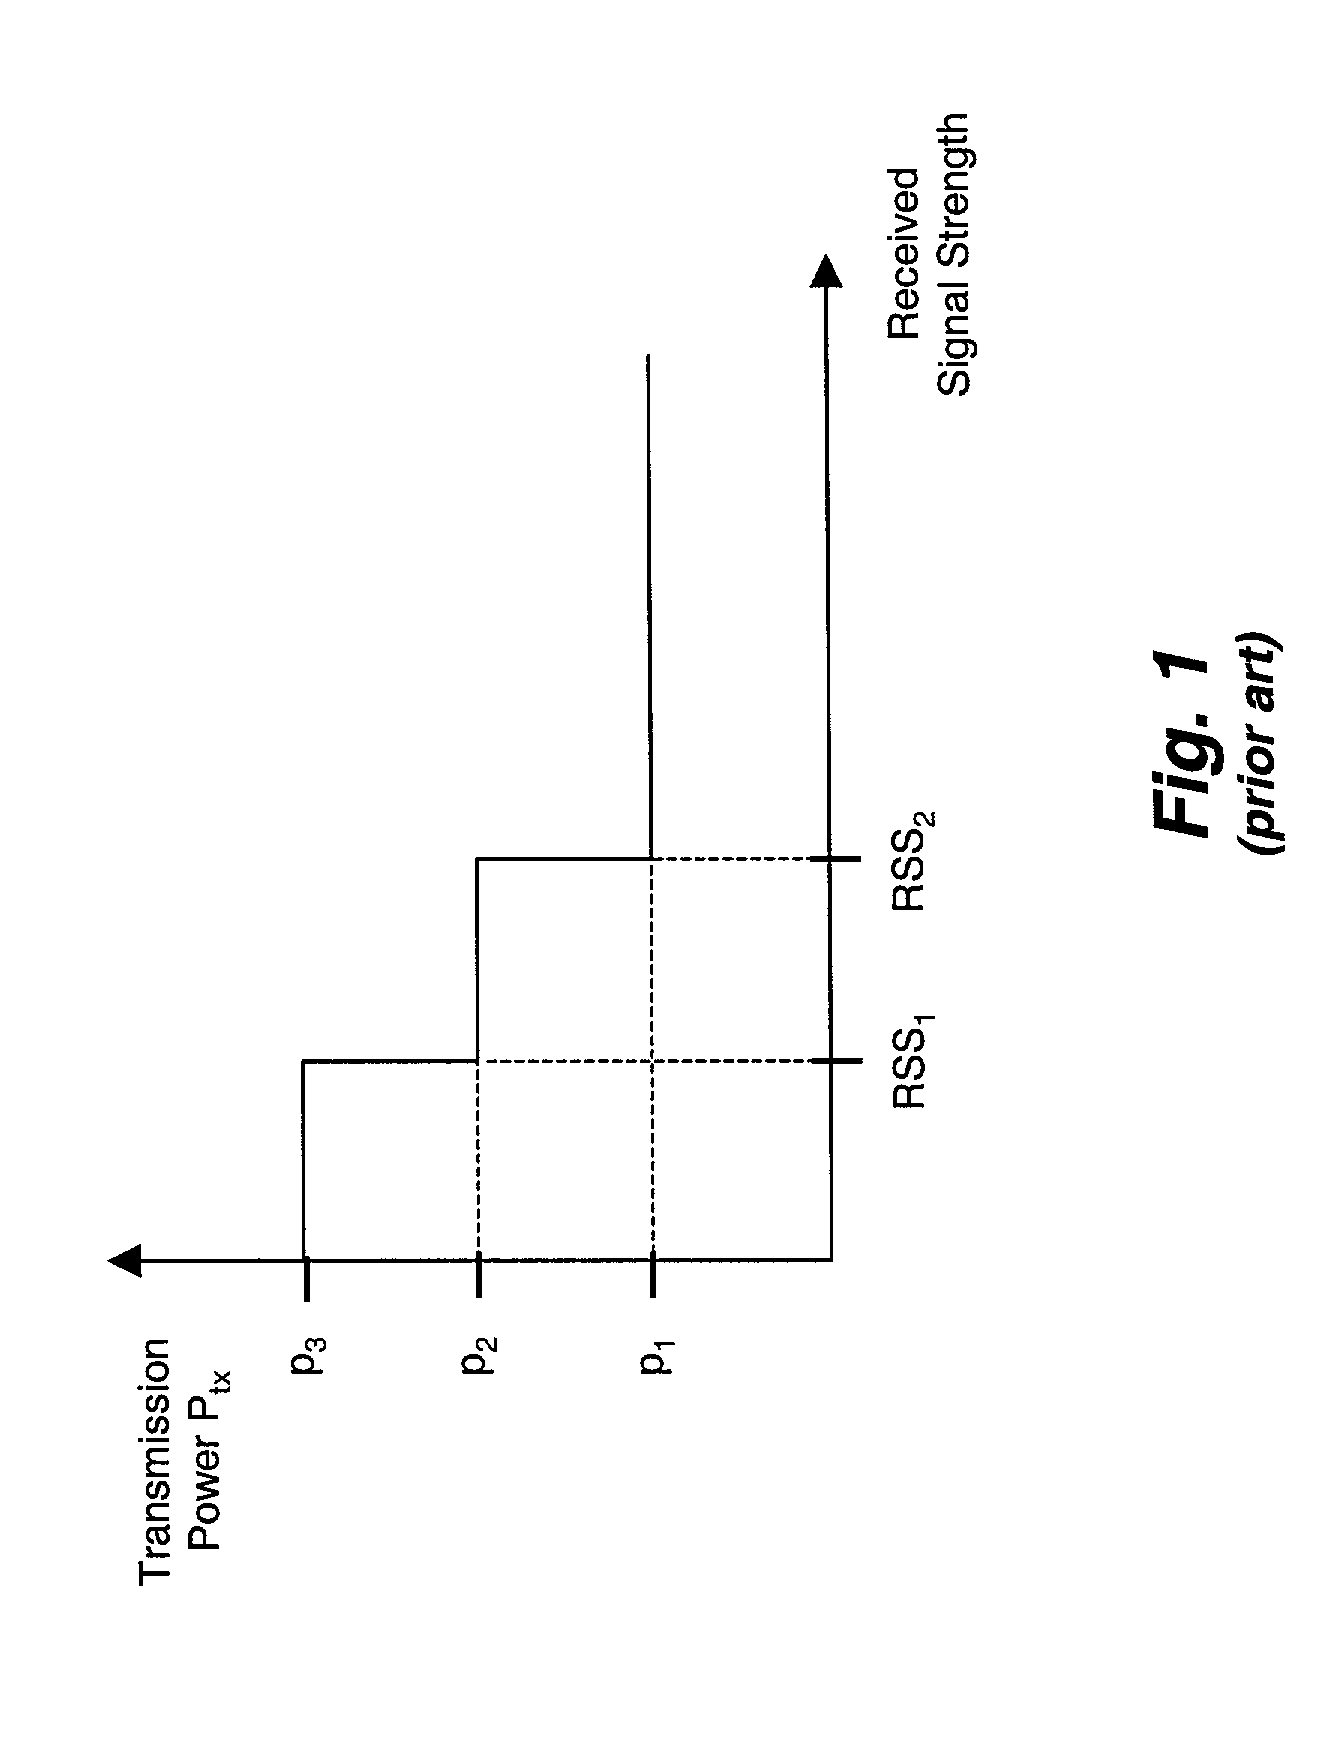 Apparatus and method for manipulating transmission power in a wireless communication device